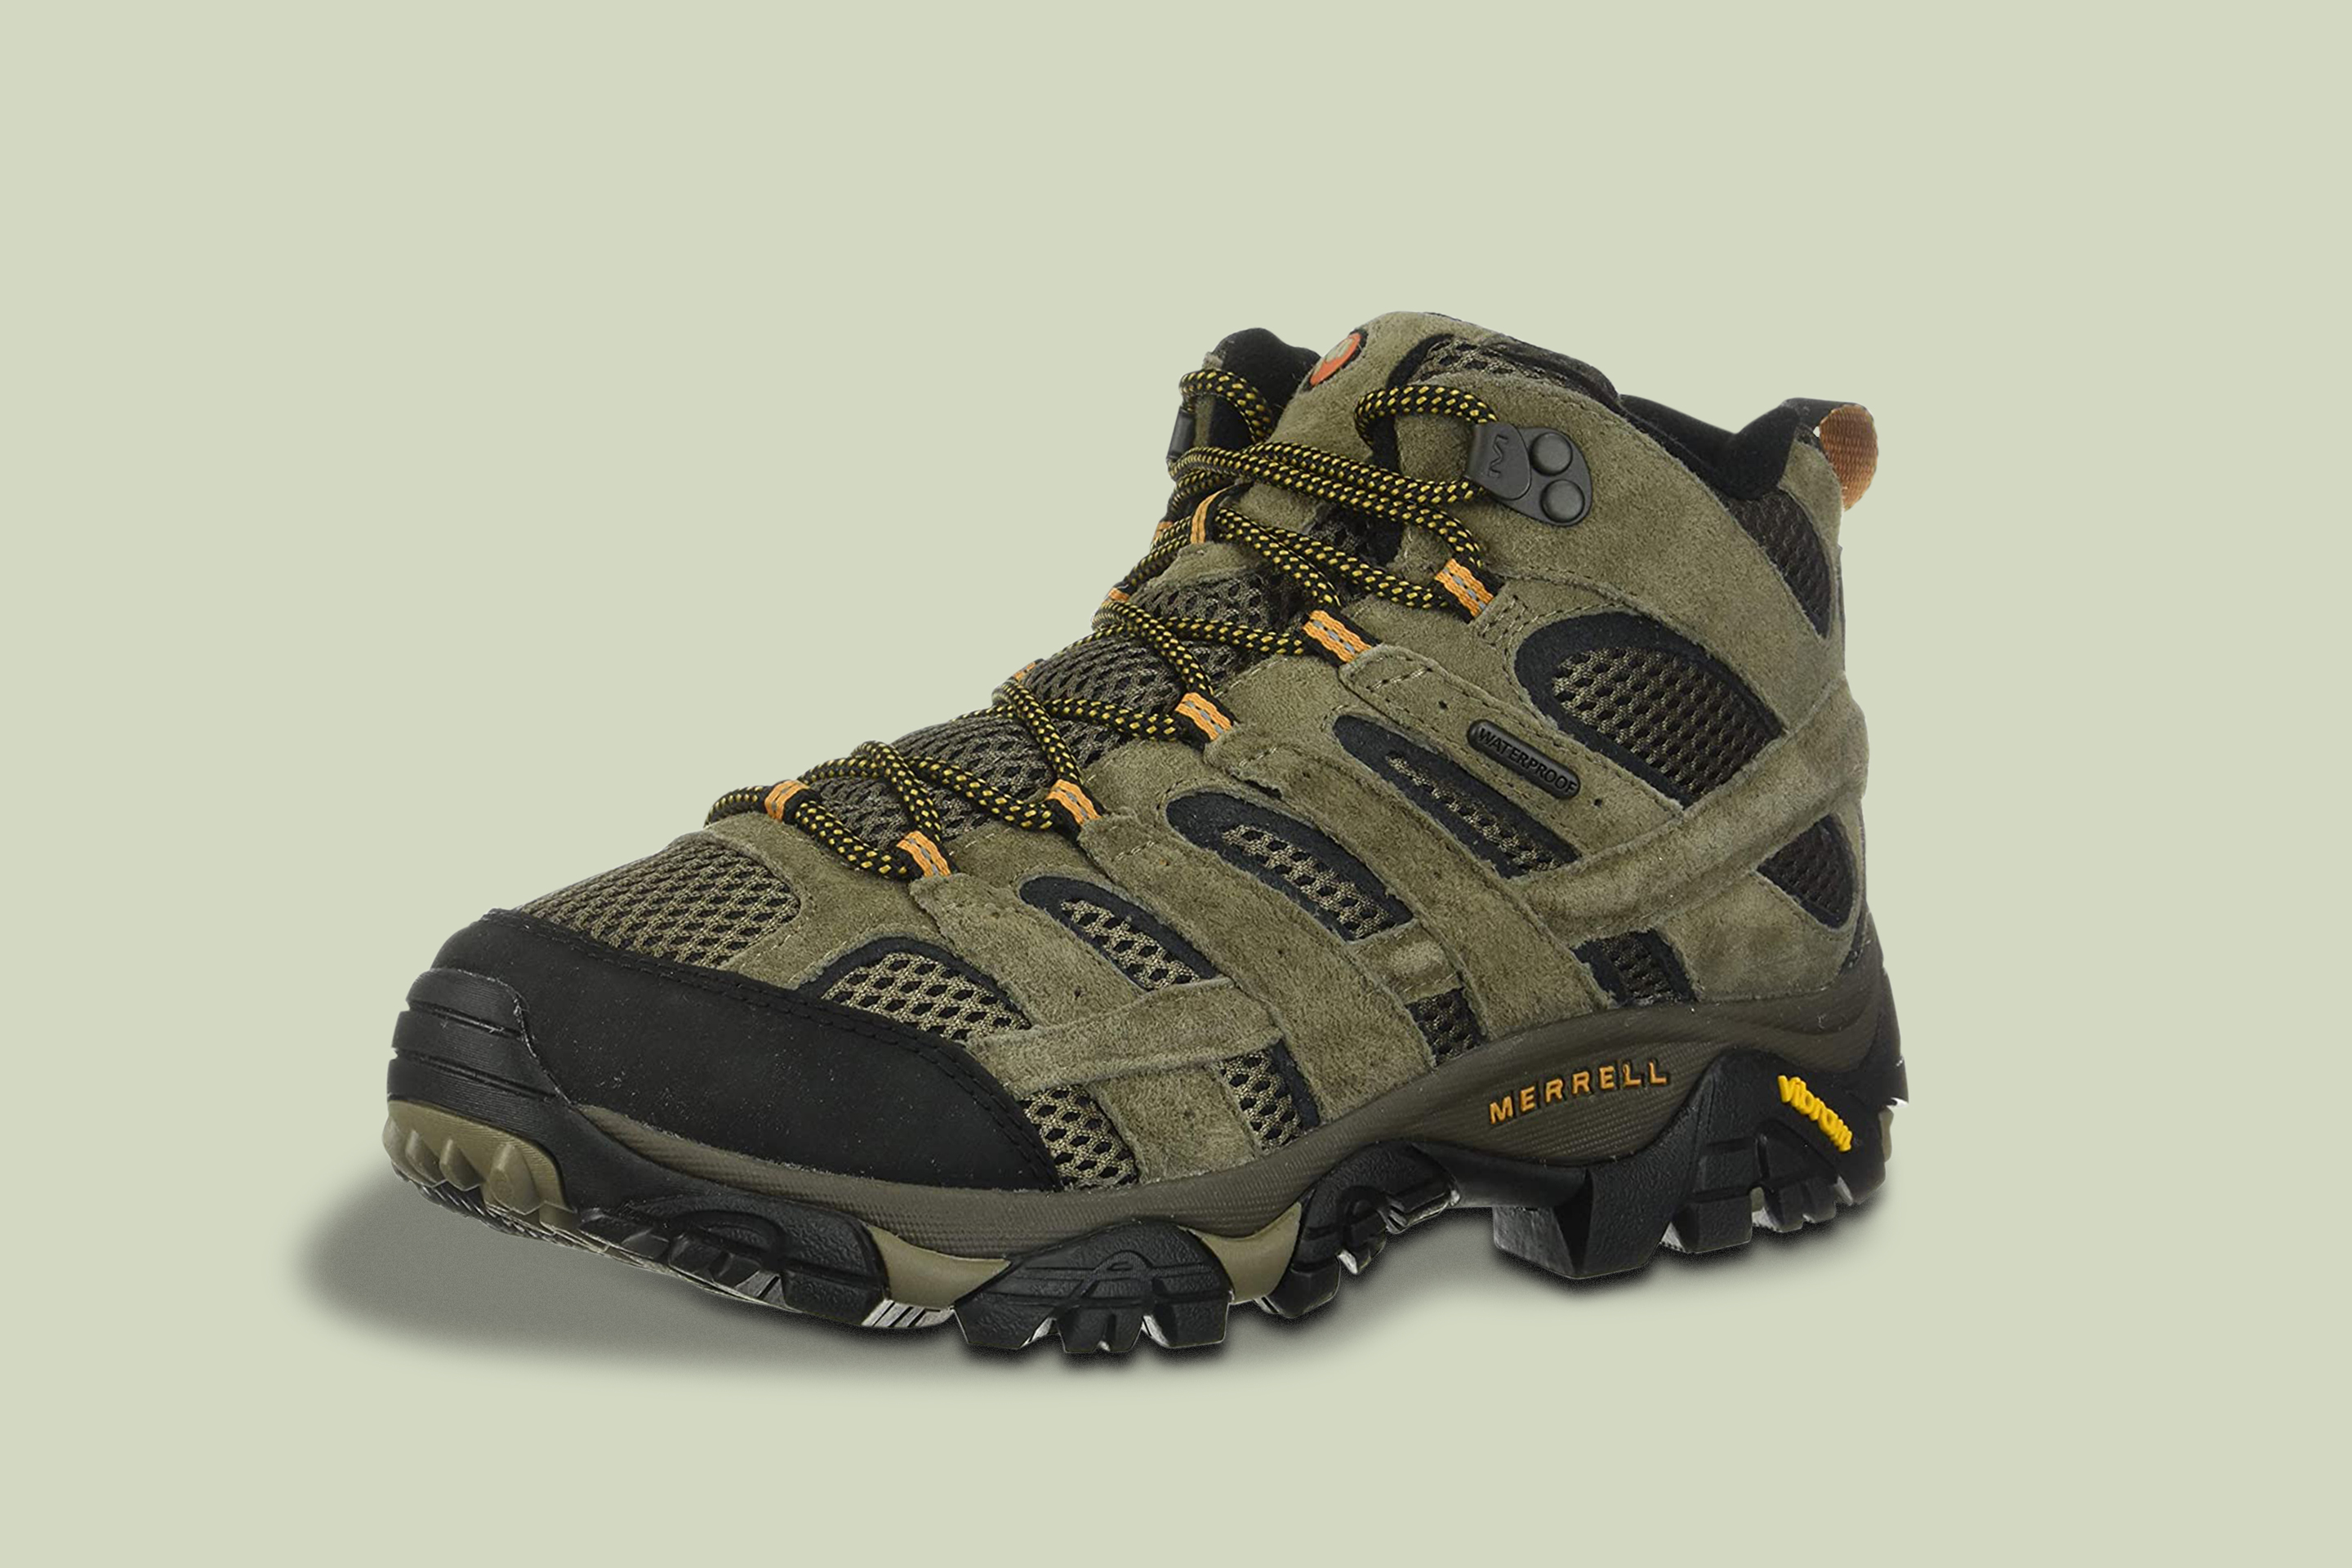 good hiking shoes for beginners